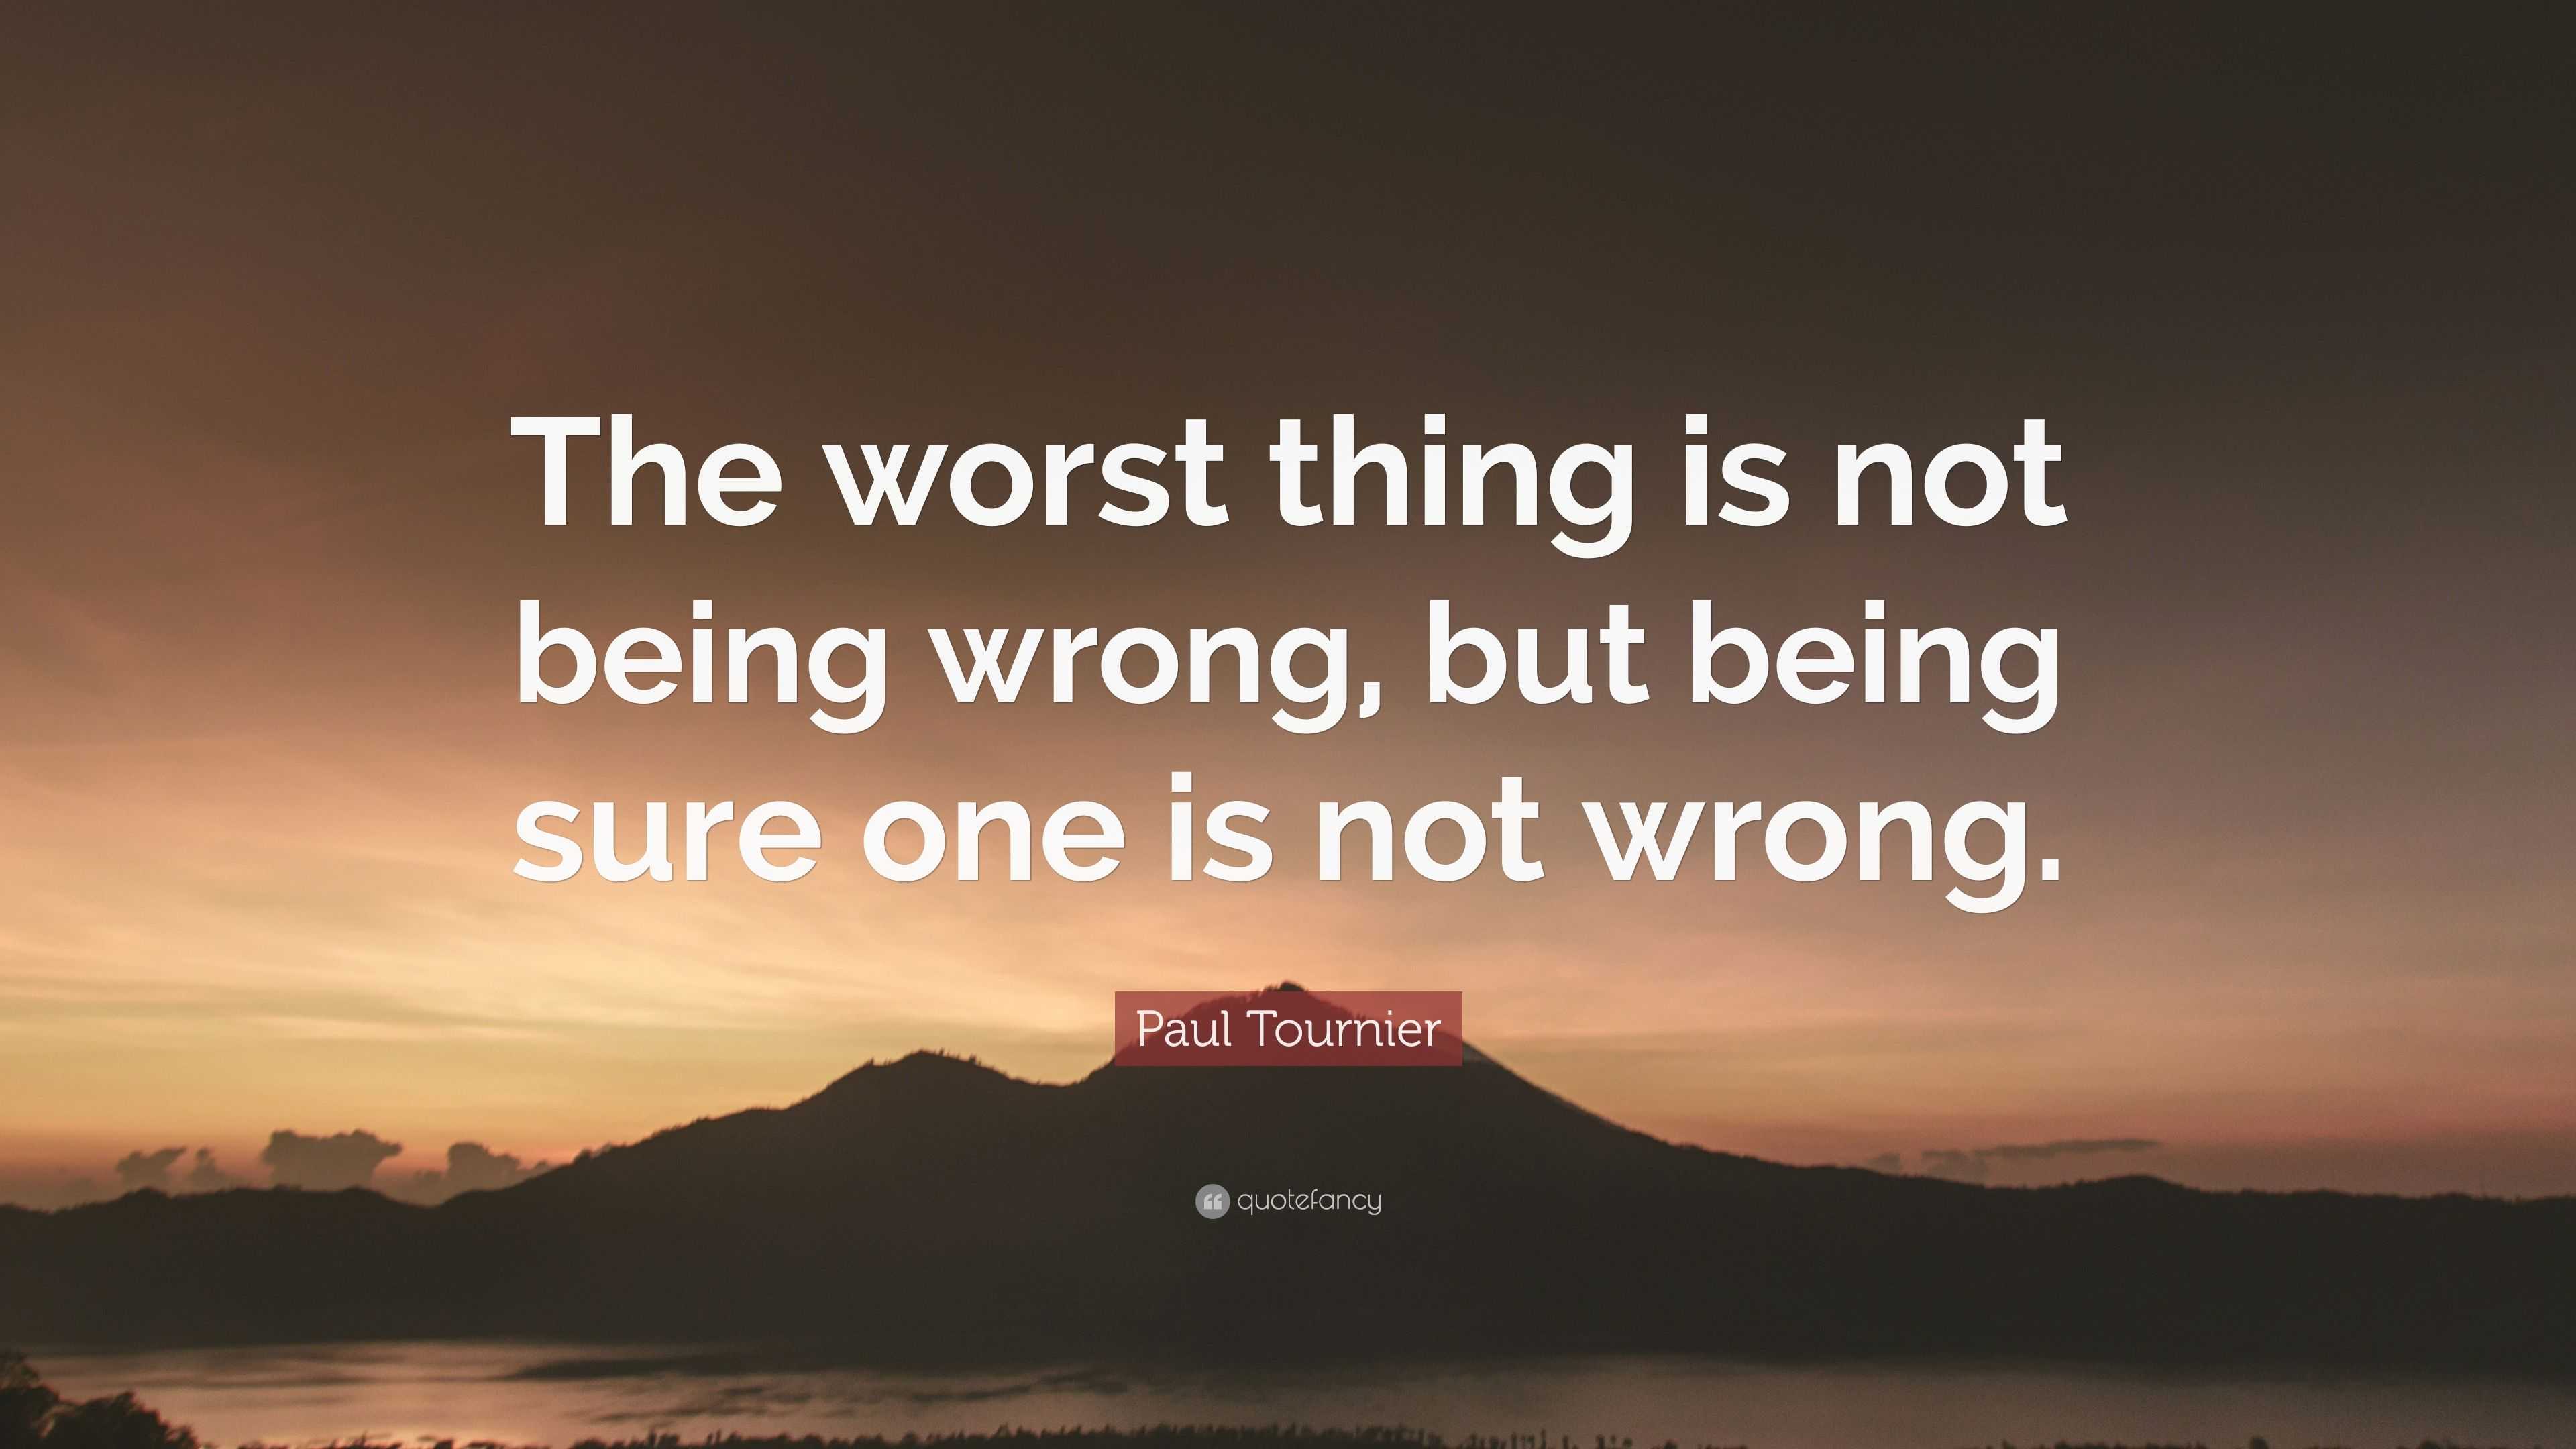 Paul Tournier Quote: “The worst thing is not being wrong ...